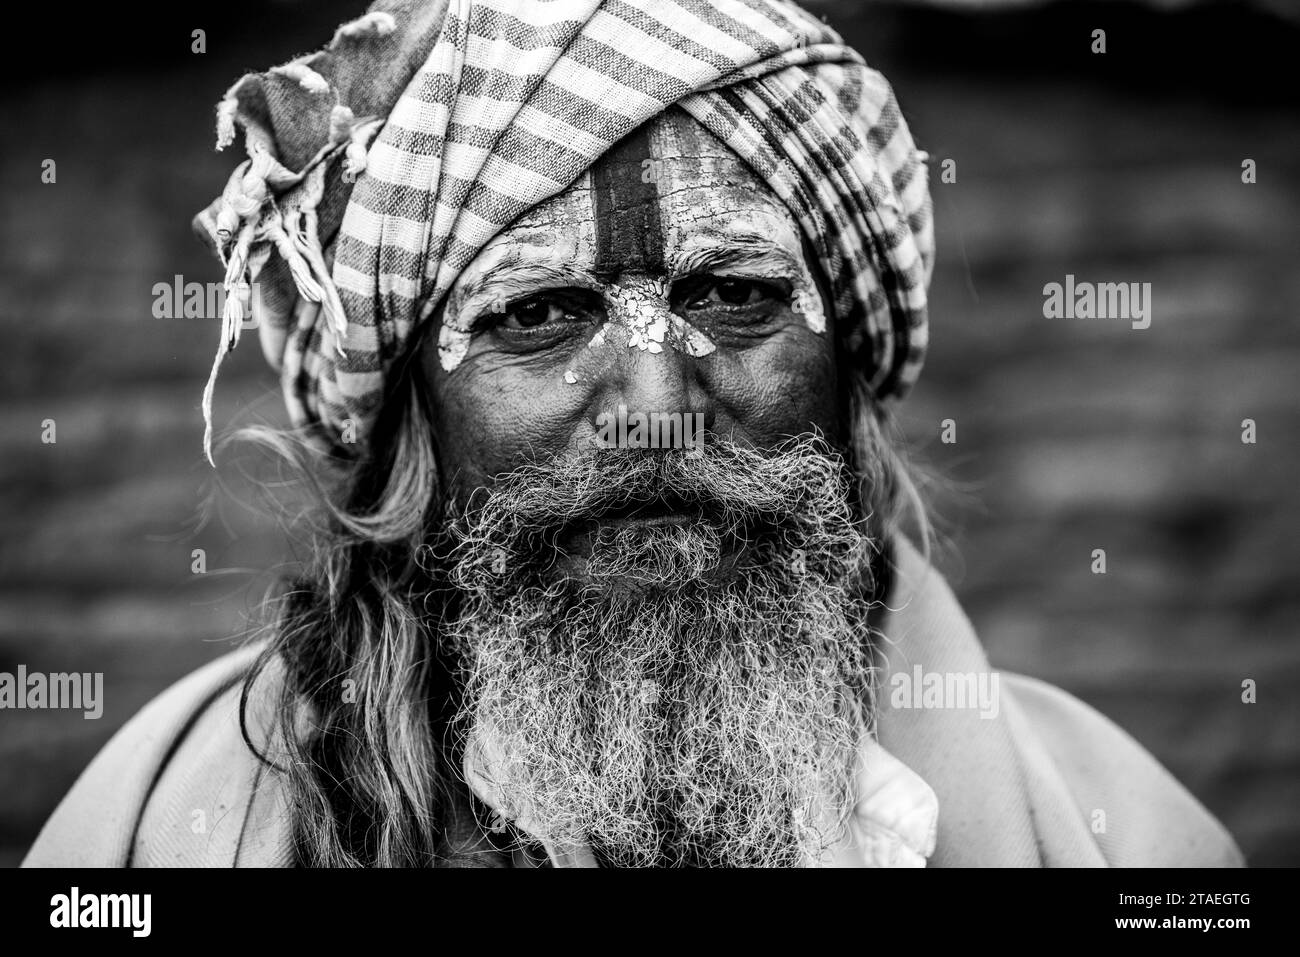 Kathmandu, Nepal- April 20,2019 : Sadhu-Indian Holy man sitting in the temple. In Hinduism, Sadhu is a common term for a mystic, an ascetic. Stock Photo